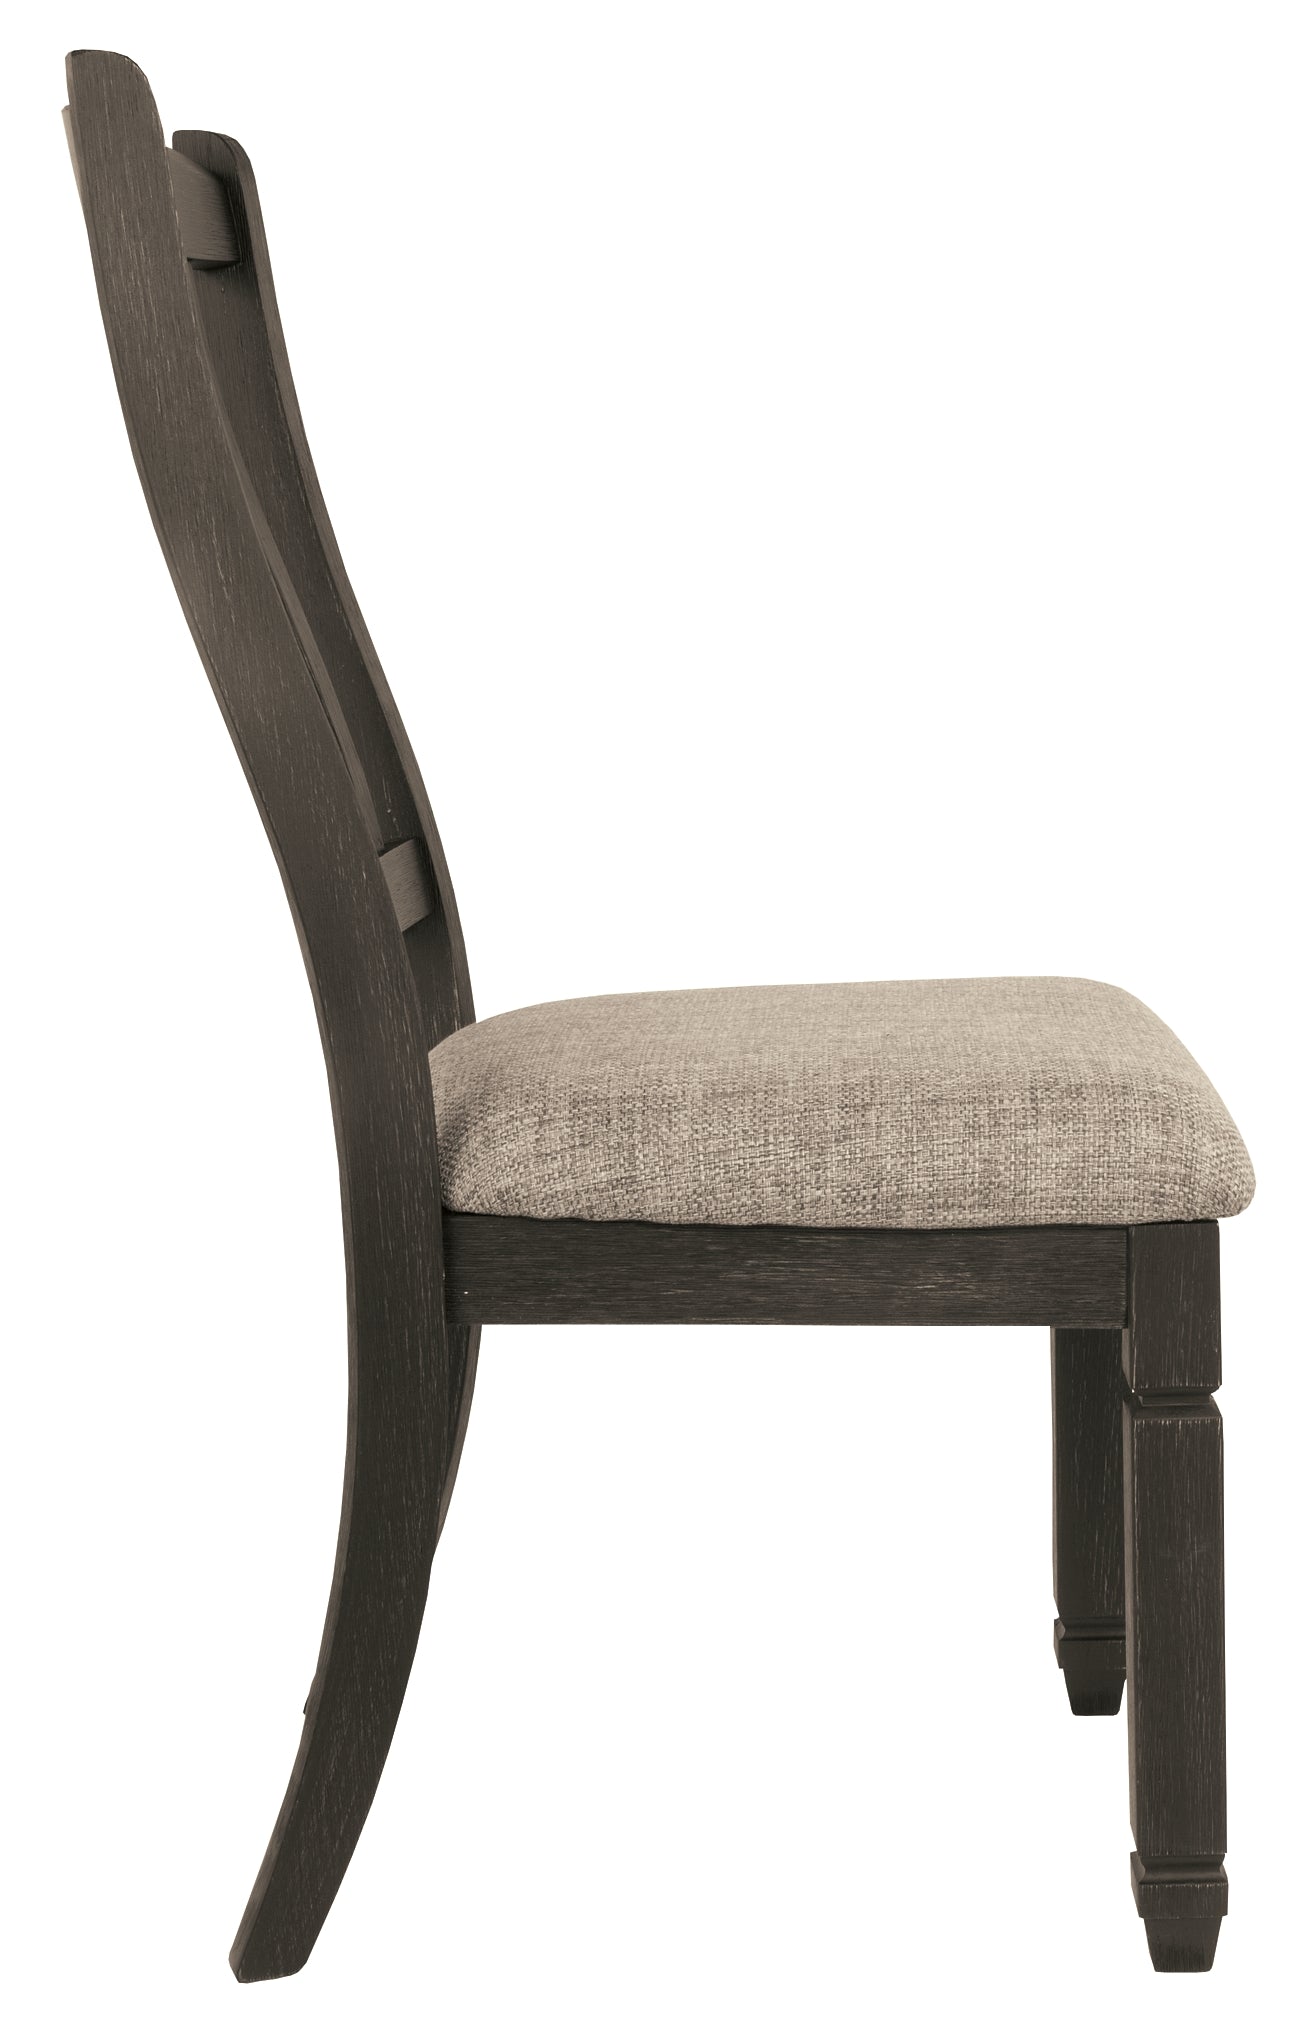 Tyler Creek Dining Chair (Set of 2)